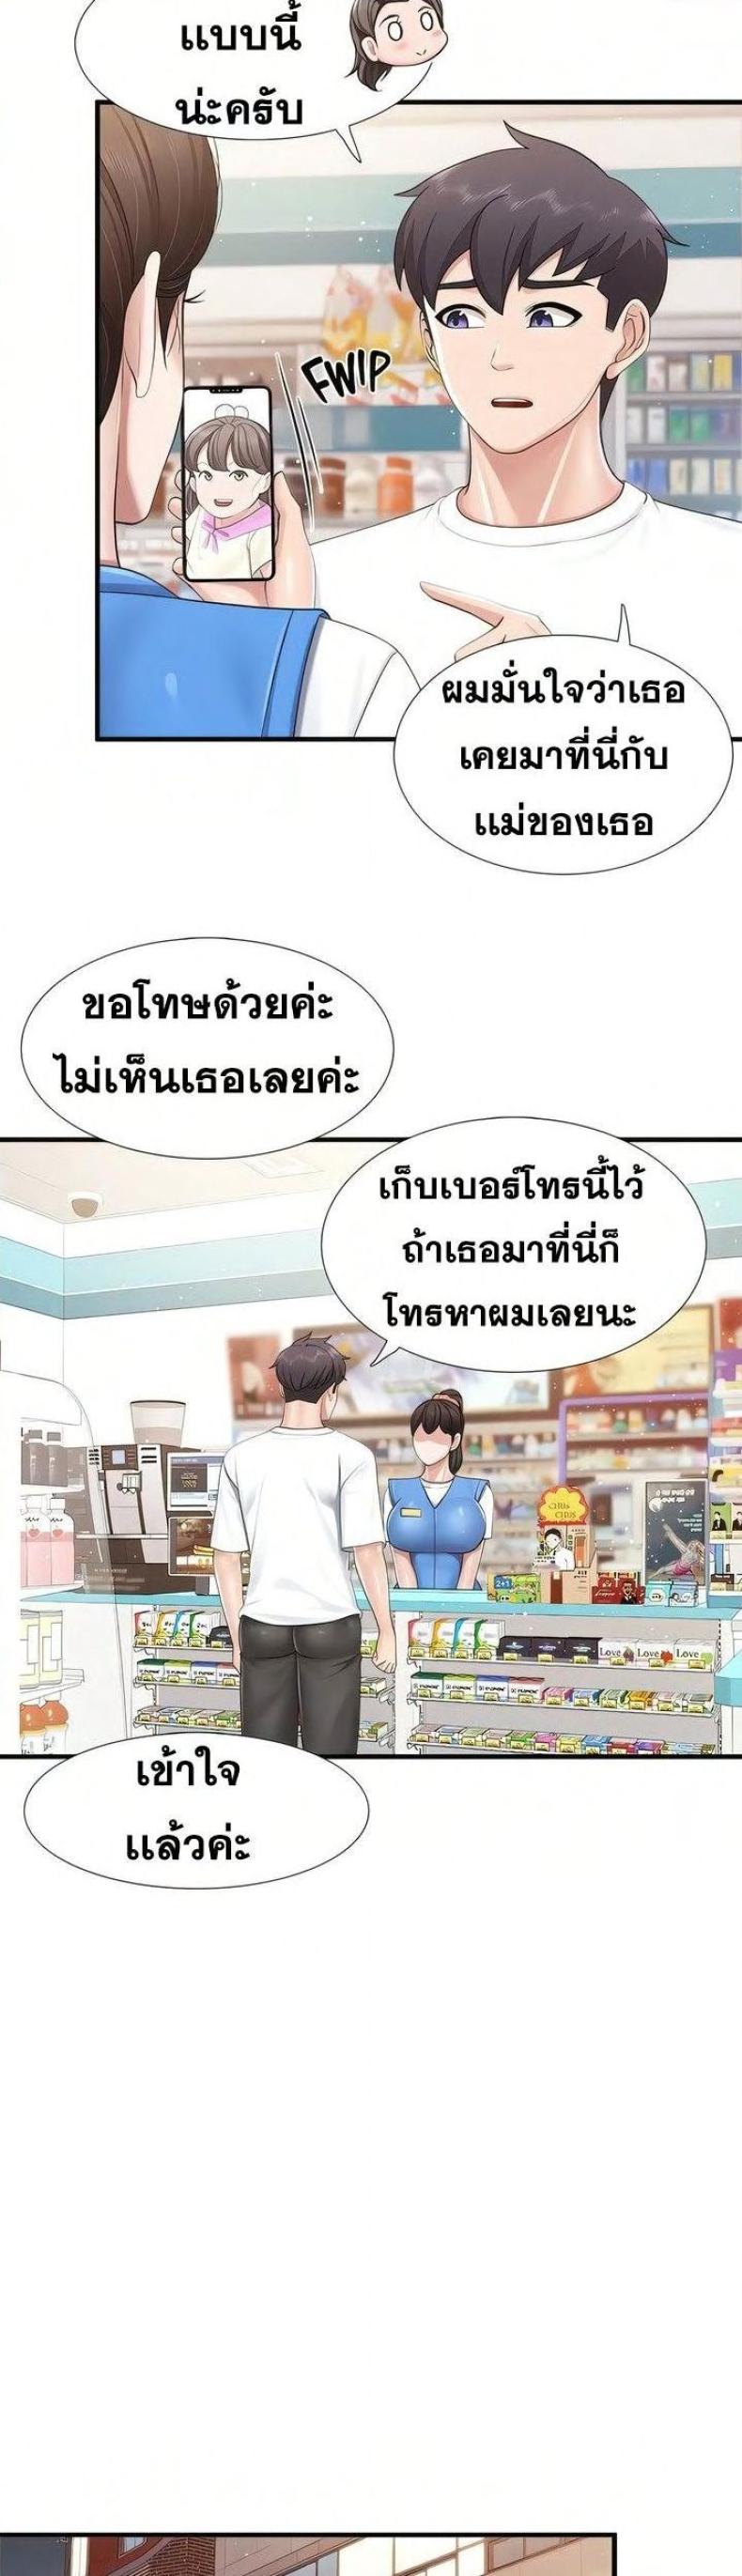 Welcome To Kids Cafe’ 99 ภาพที่ 5